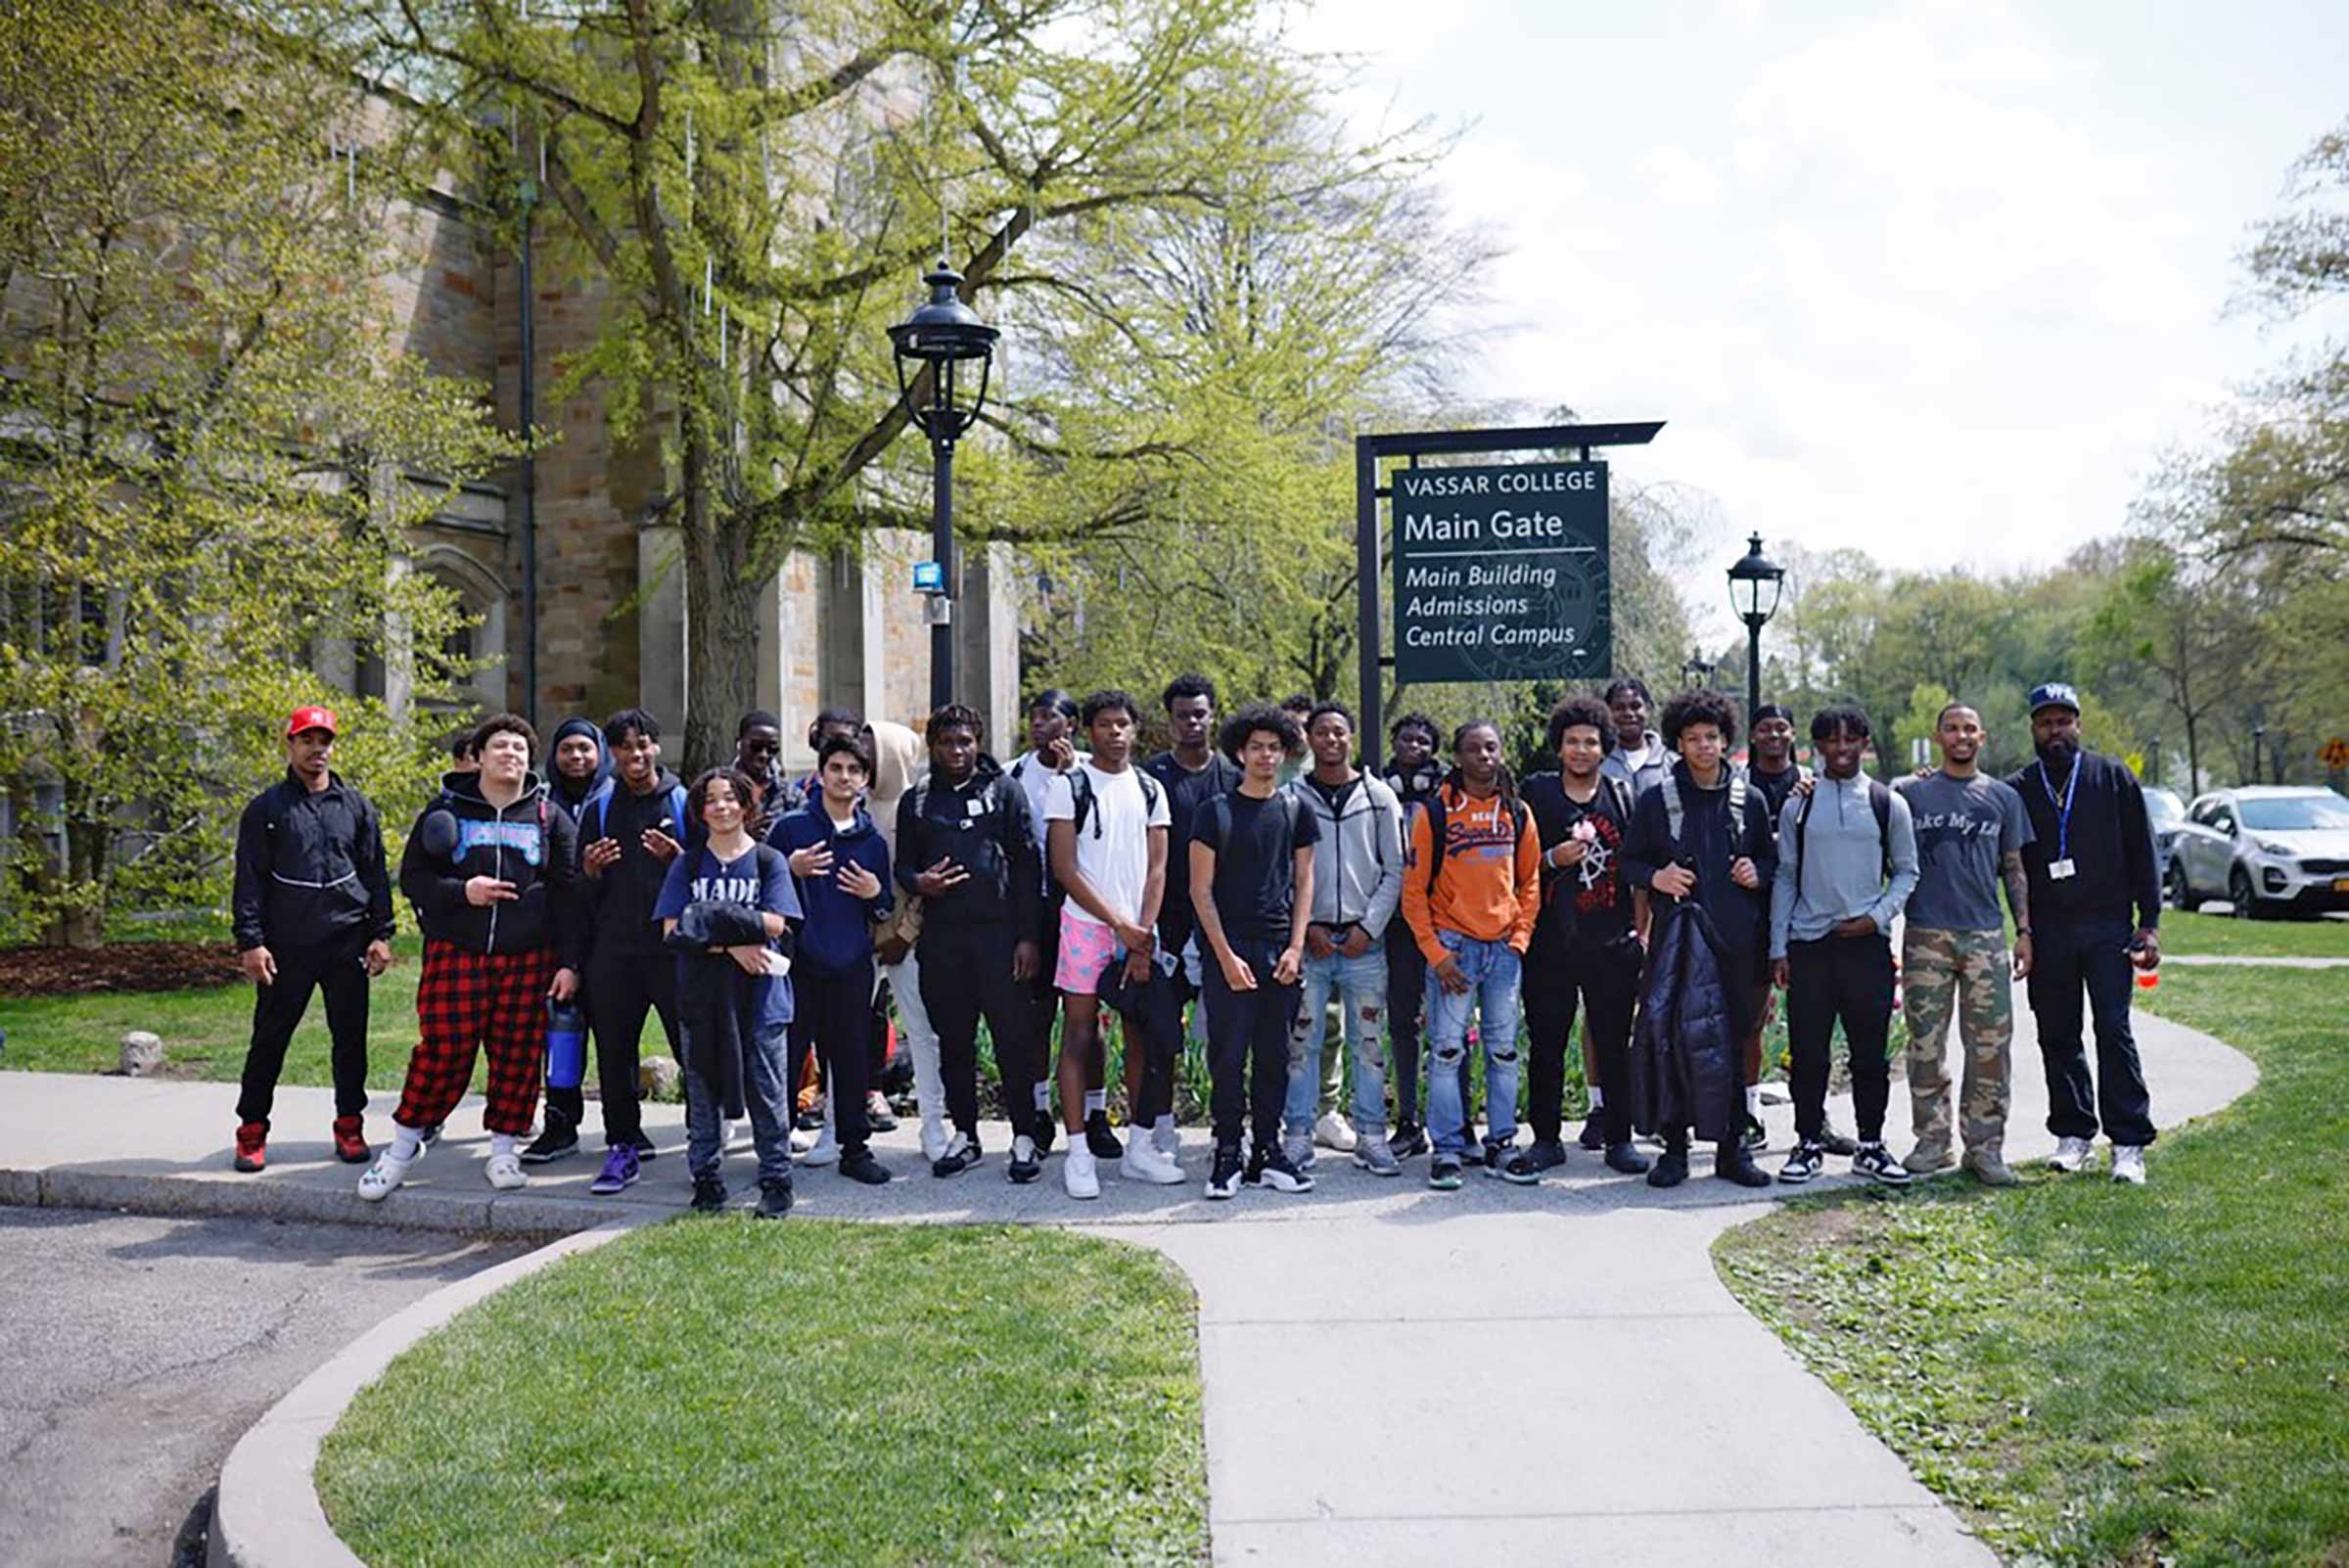 Devyn Benson stands in front of Vassar sign with students from Kingston High School and Franklin D. Roosevelt High School.